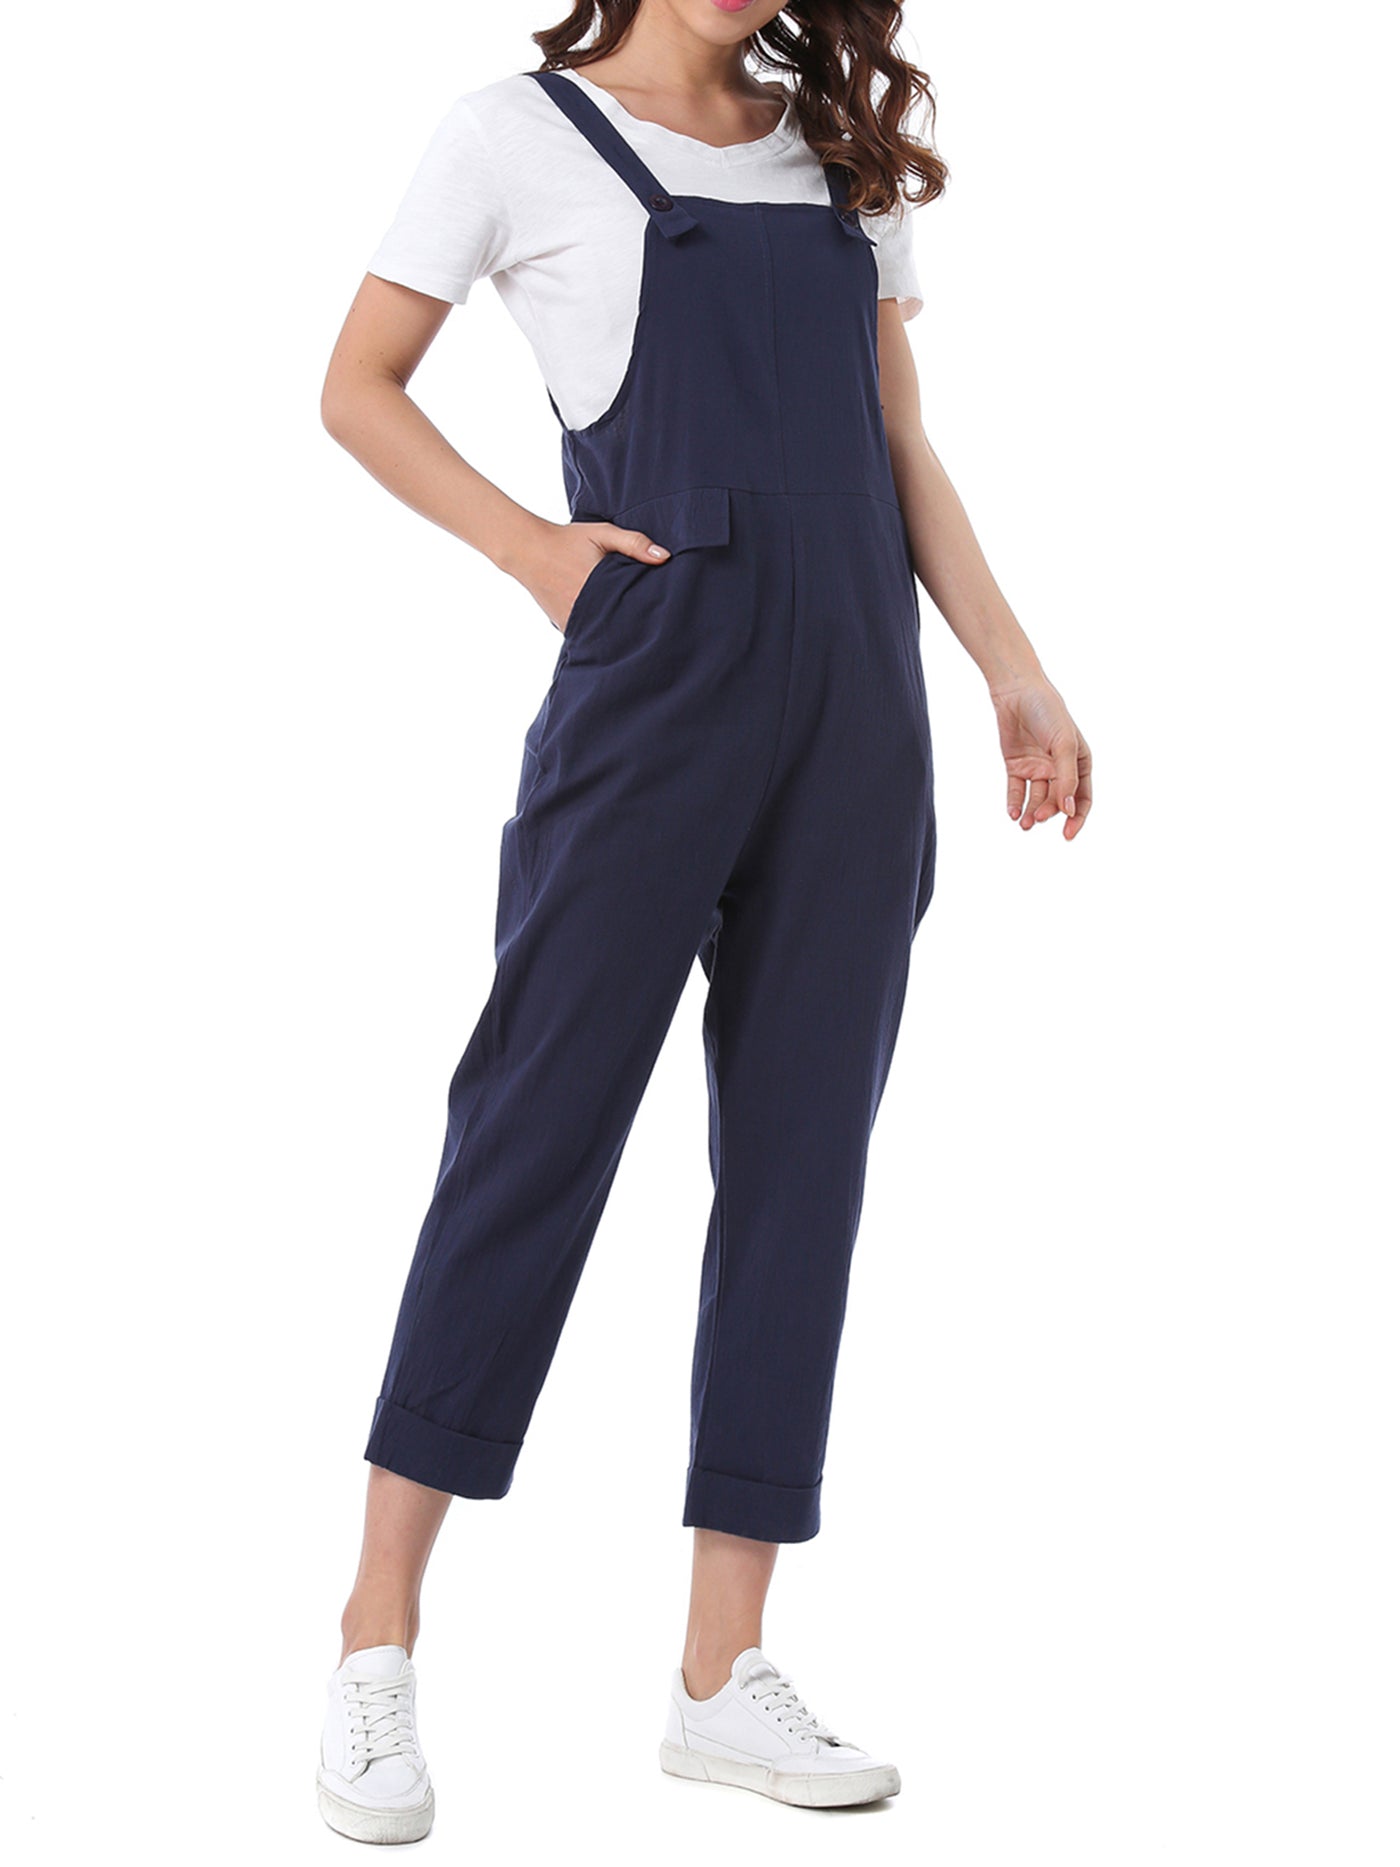 Allegra K Summer Cotton Pockets Casual Sleeveless Baggy Loose Jumpsuits